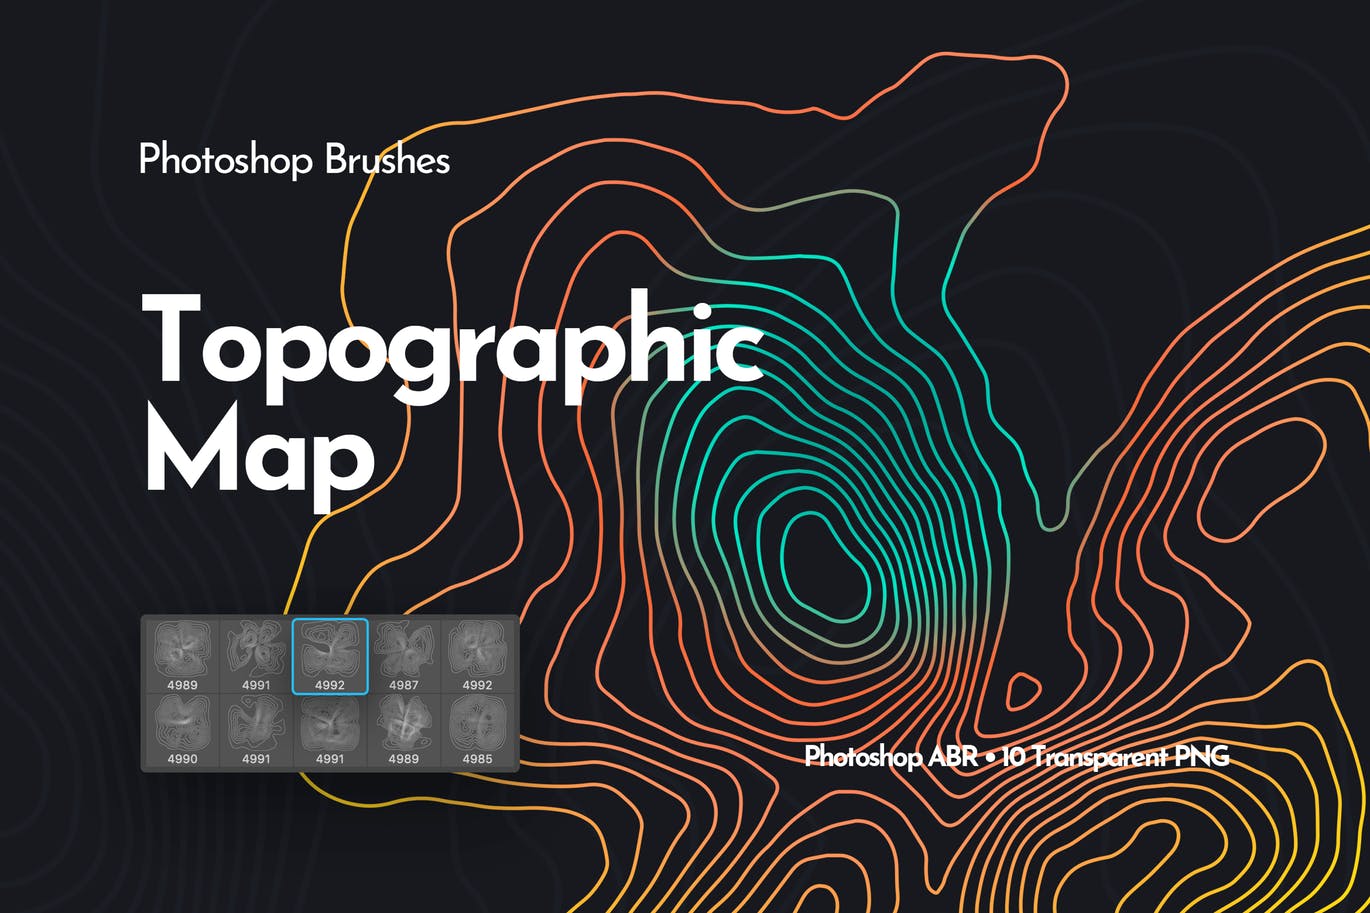 A topographic map brushes for photoshop